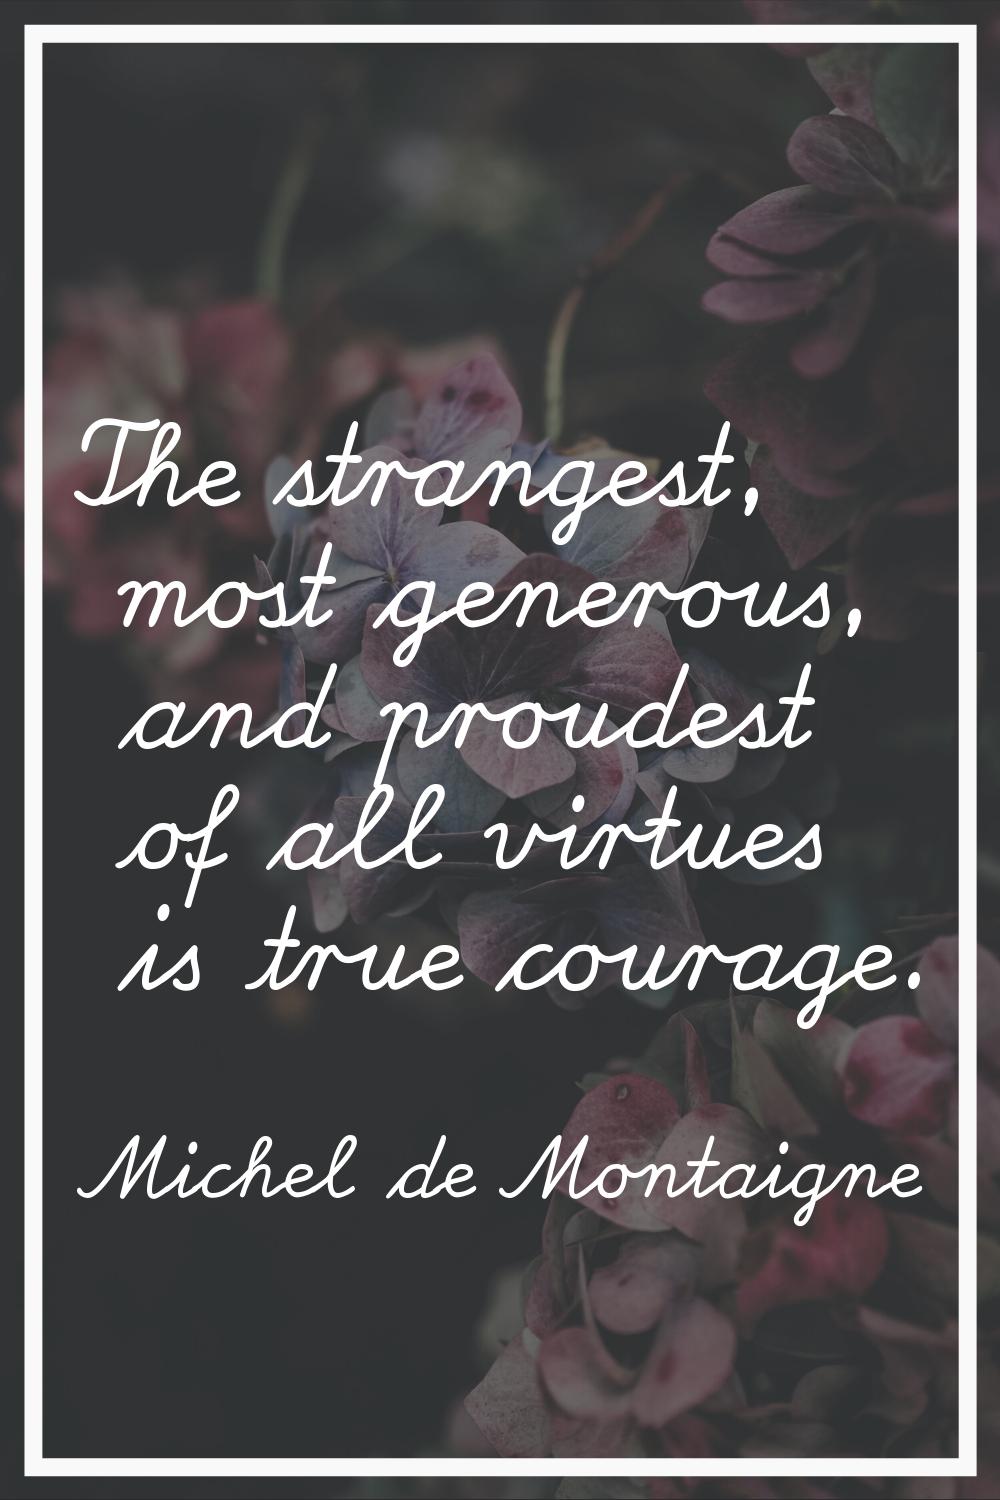 The strangest, most generous, and proudest of all virtues is true courage.